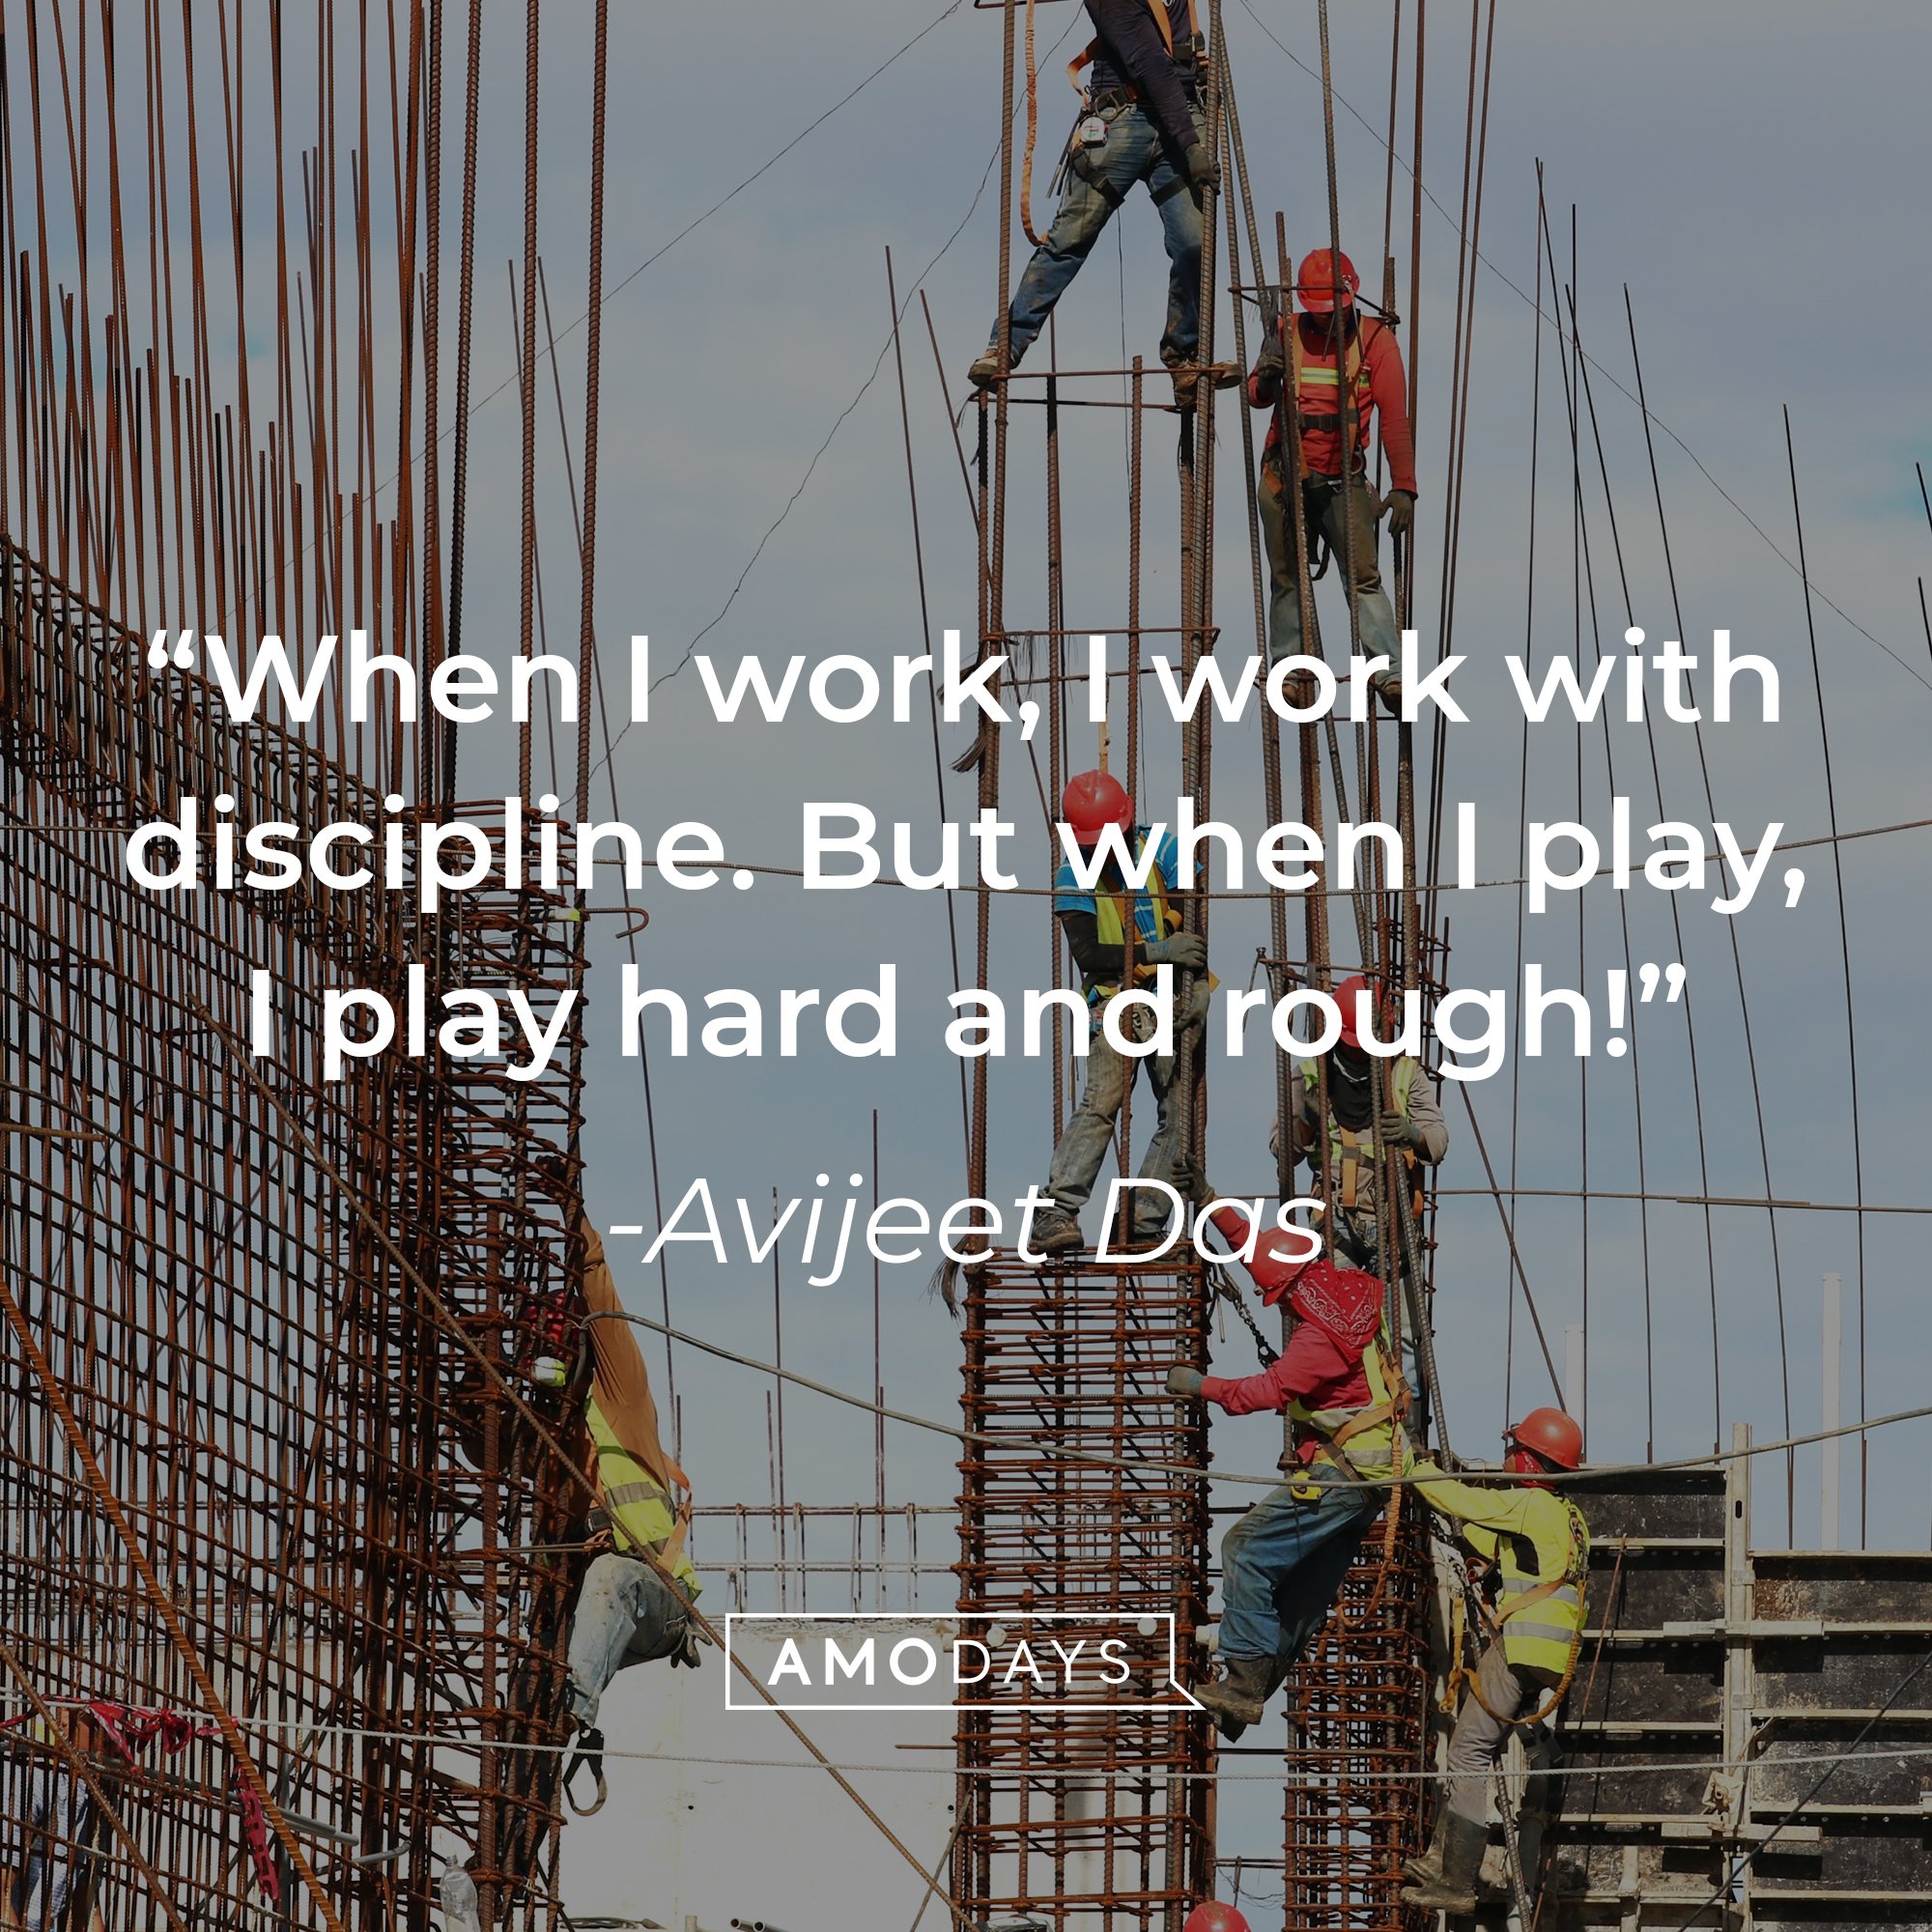 Avijeet Das' quote: "When I work, I work with discipline. But when I play, I play hard and rough!" | Image: AmoDays